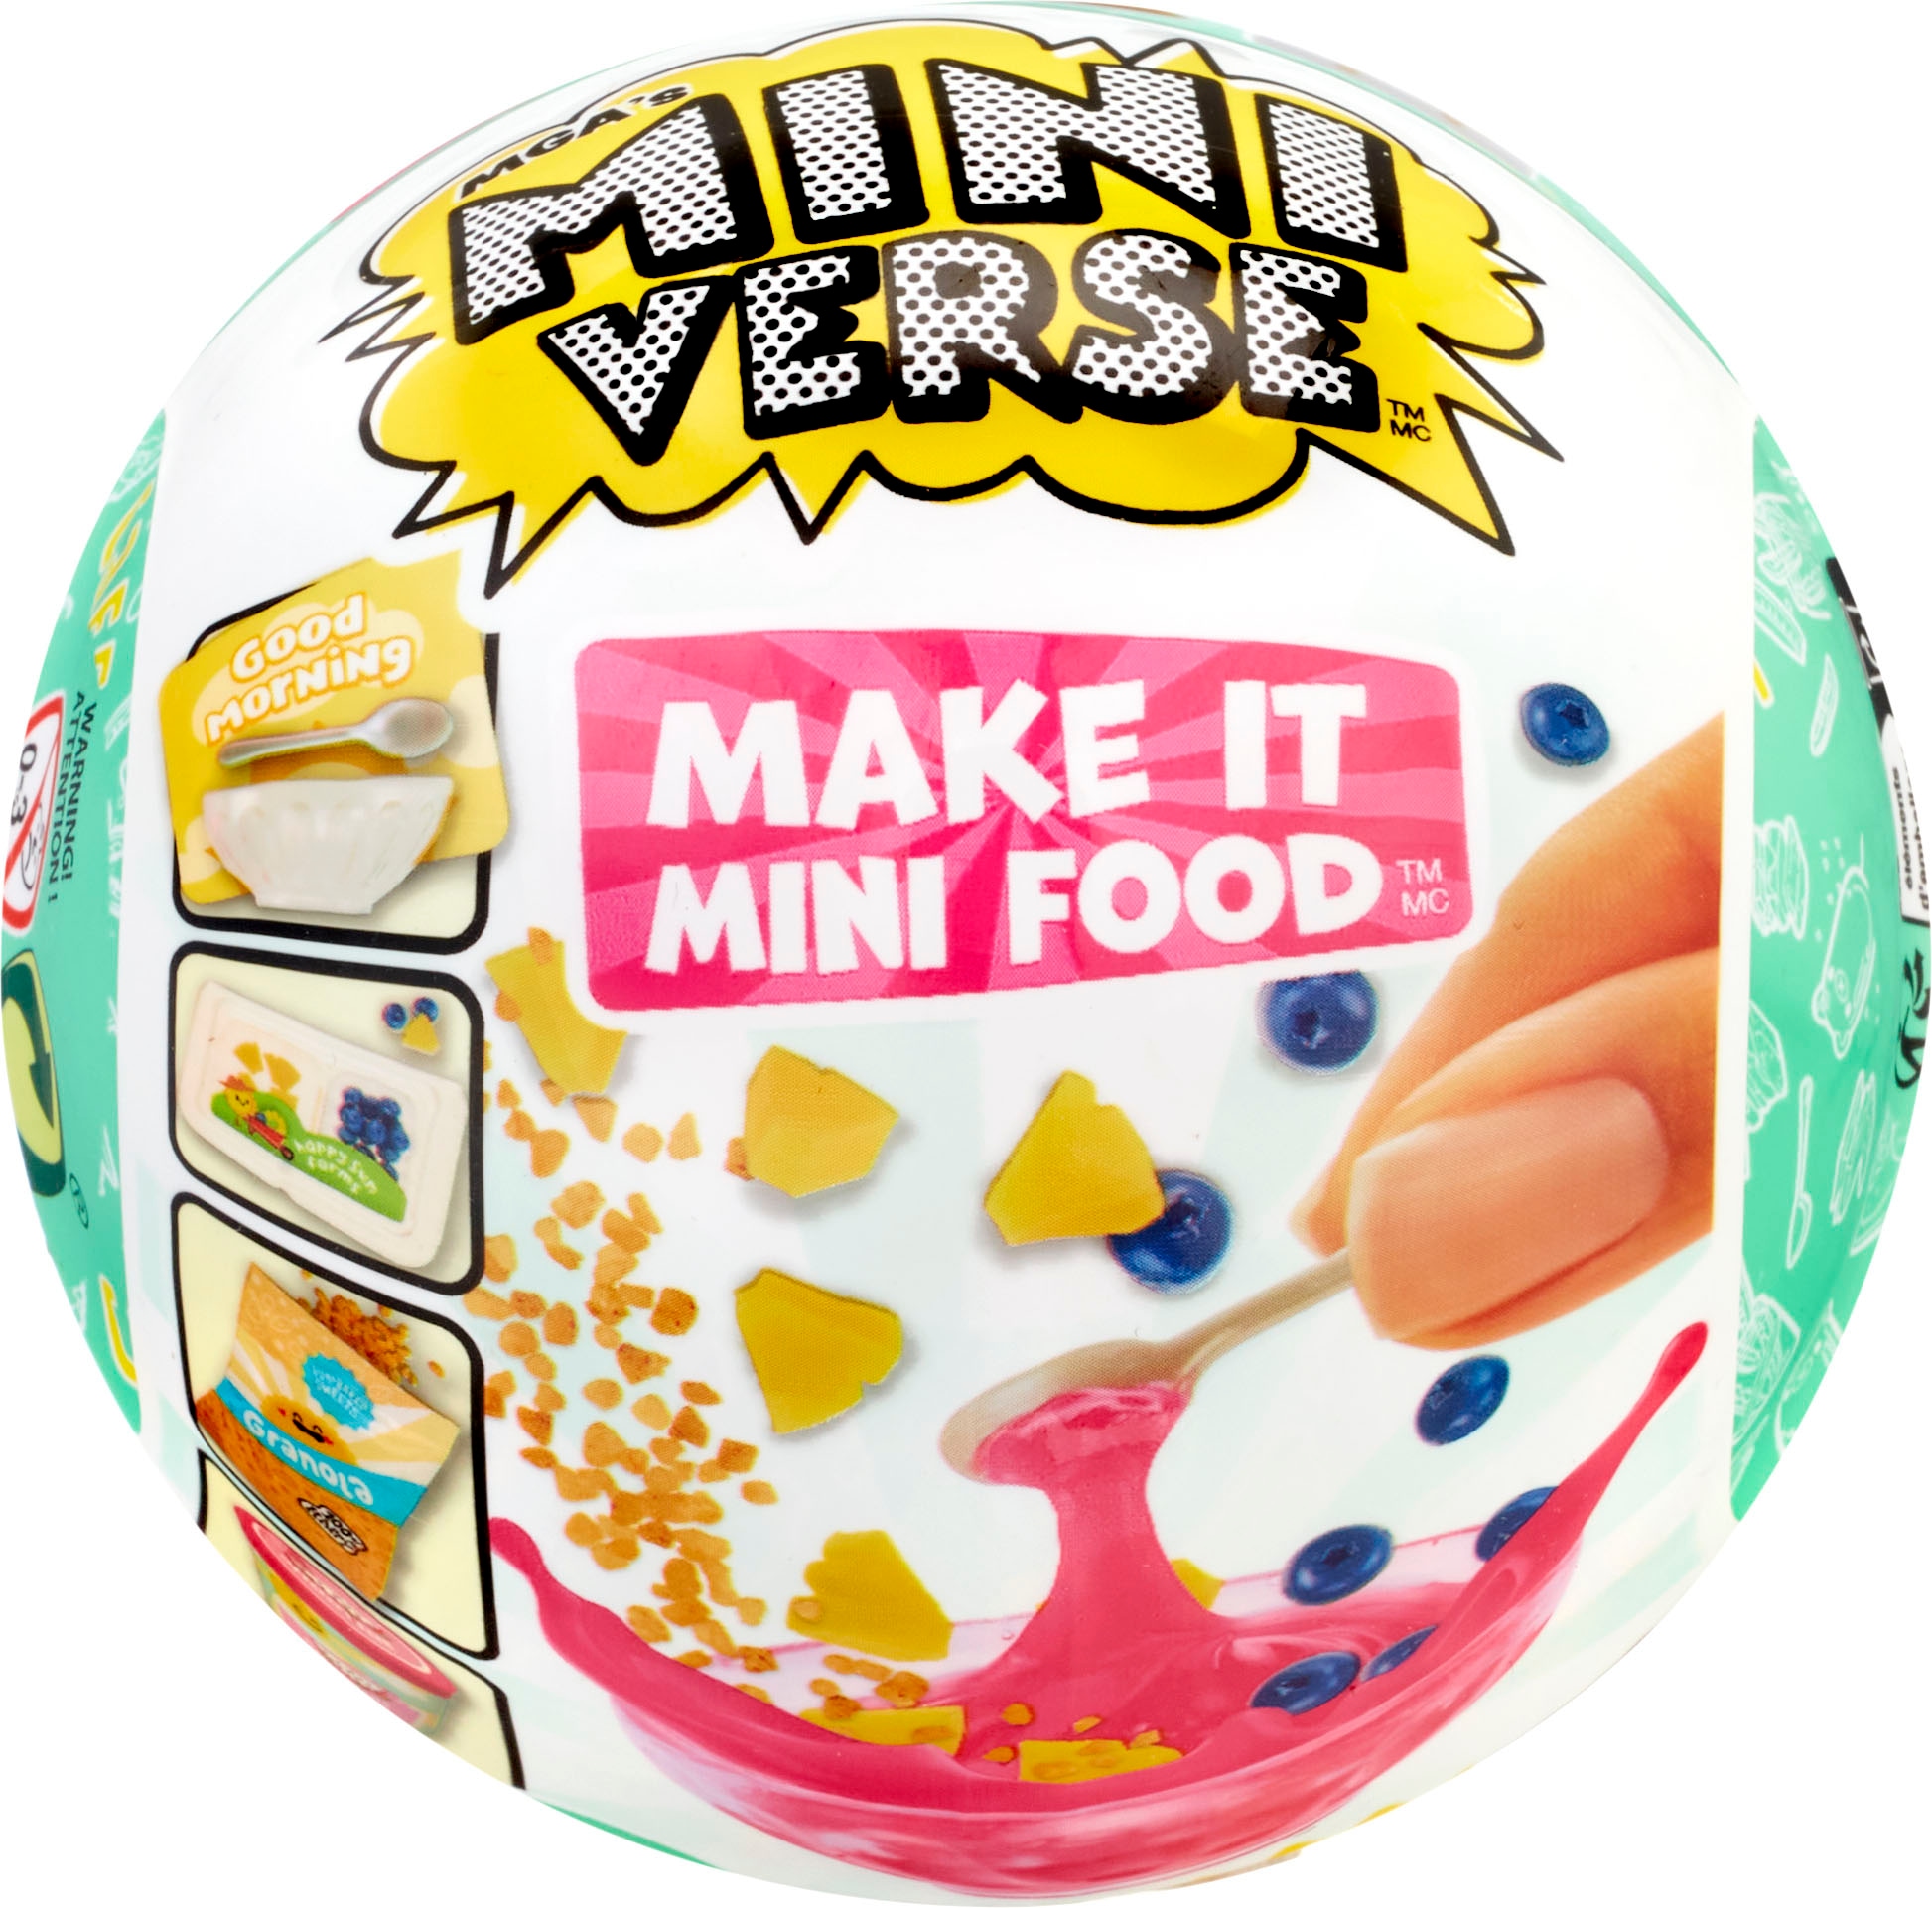 Kreativset »MGA's Miniverse-Mini Foods Cafe«, sortierte Lieferung